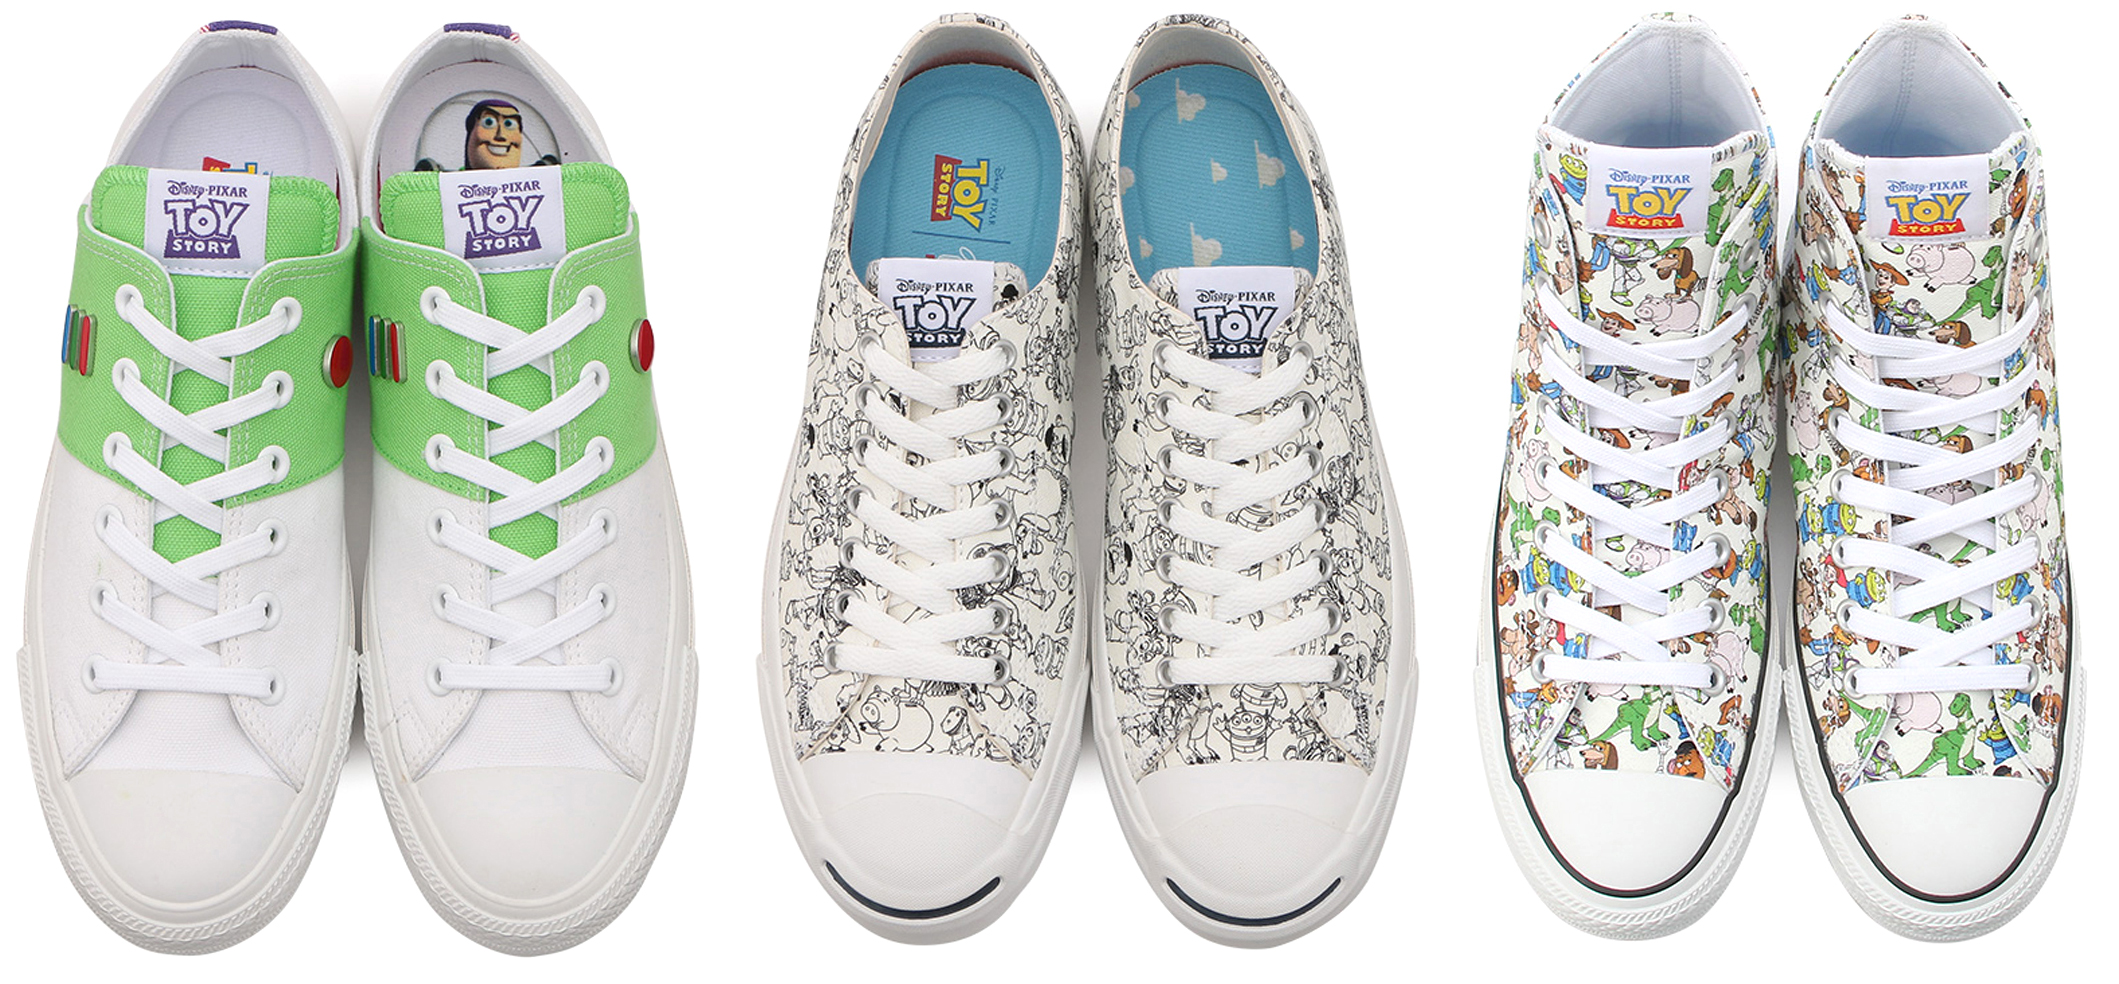 Converse Teamed Up With Pixar To Put Toy Story Characters On Your Classic All Stars